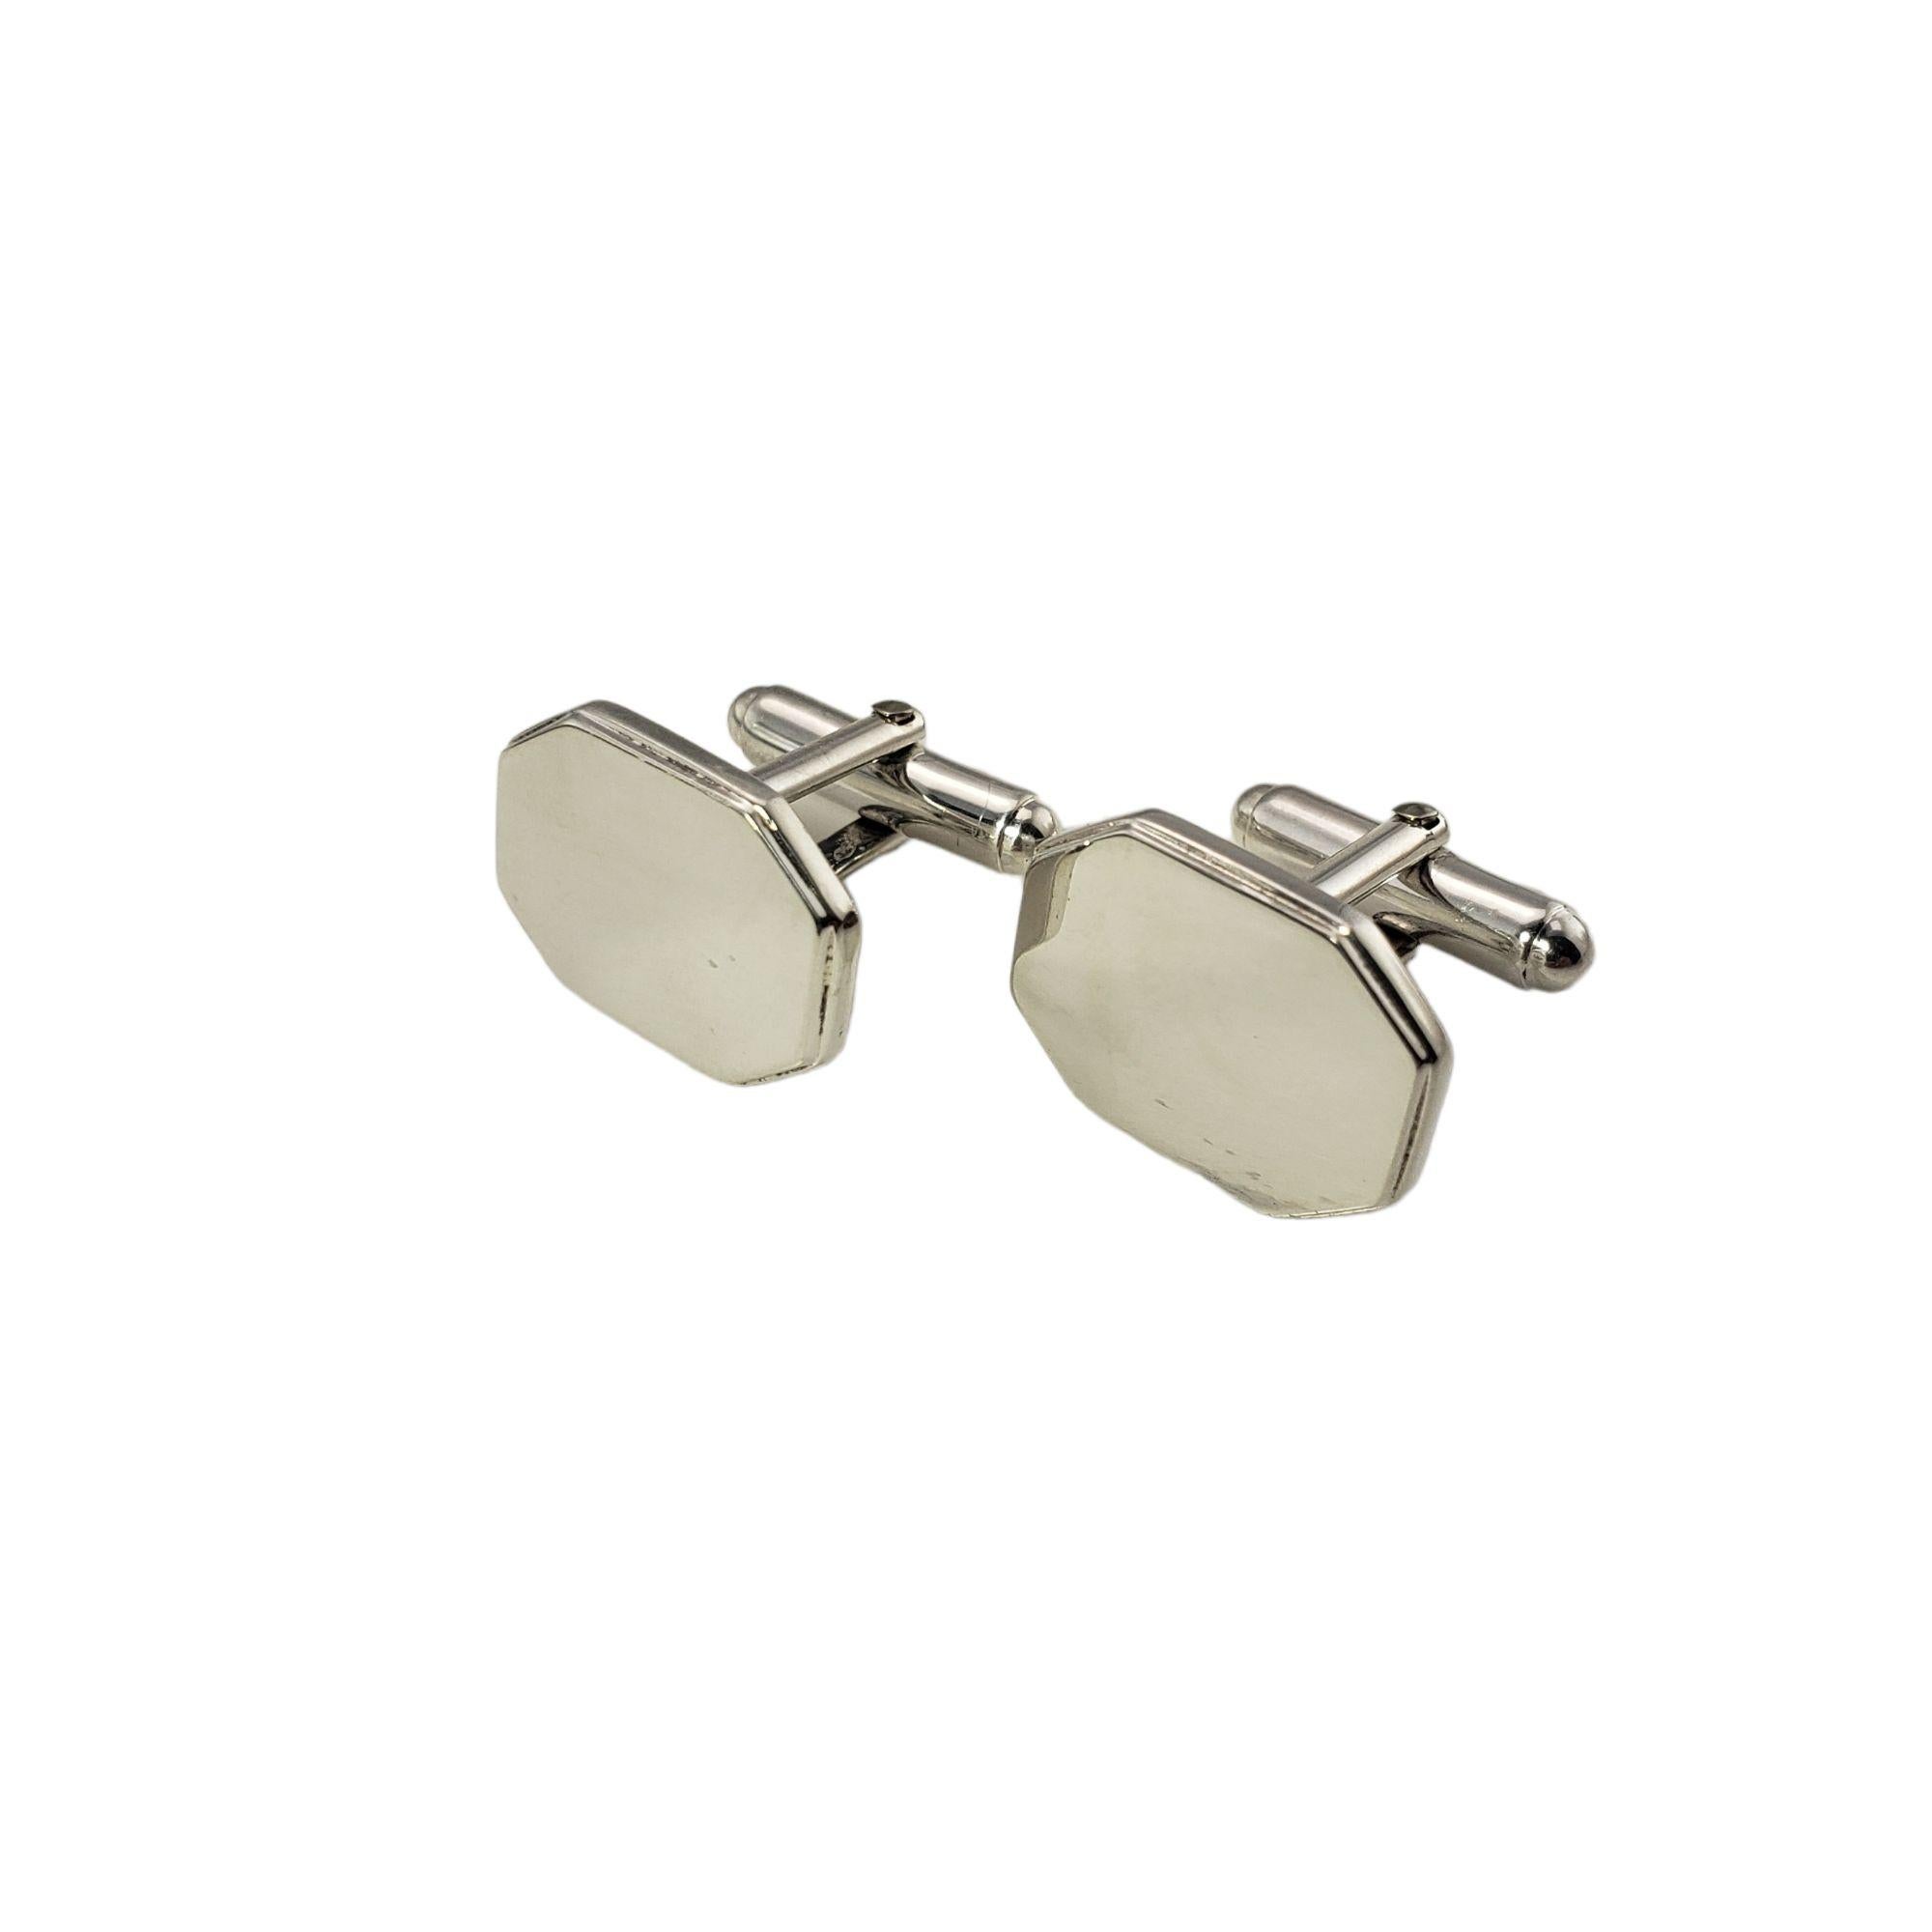 These elegant cufflinks by Tiffany & Co. are crafted in meticulously detailed sterling silver.

Size: 19 mm x 14 mm

Weight:  8.6 dwt. / 13.5 gr.

Stamped:  Tiffany & Co. 925

Very good condition, professionally polished.

Will come packaged in a